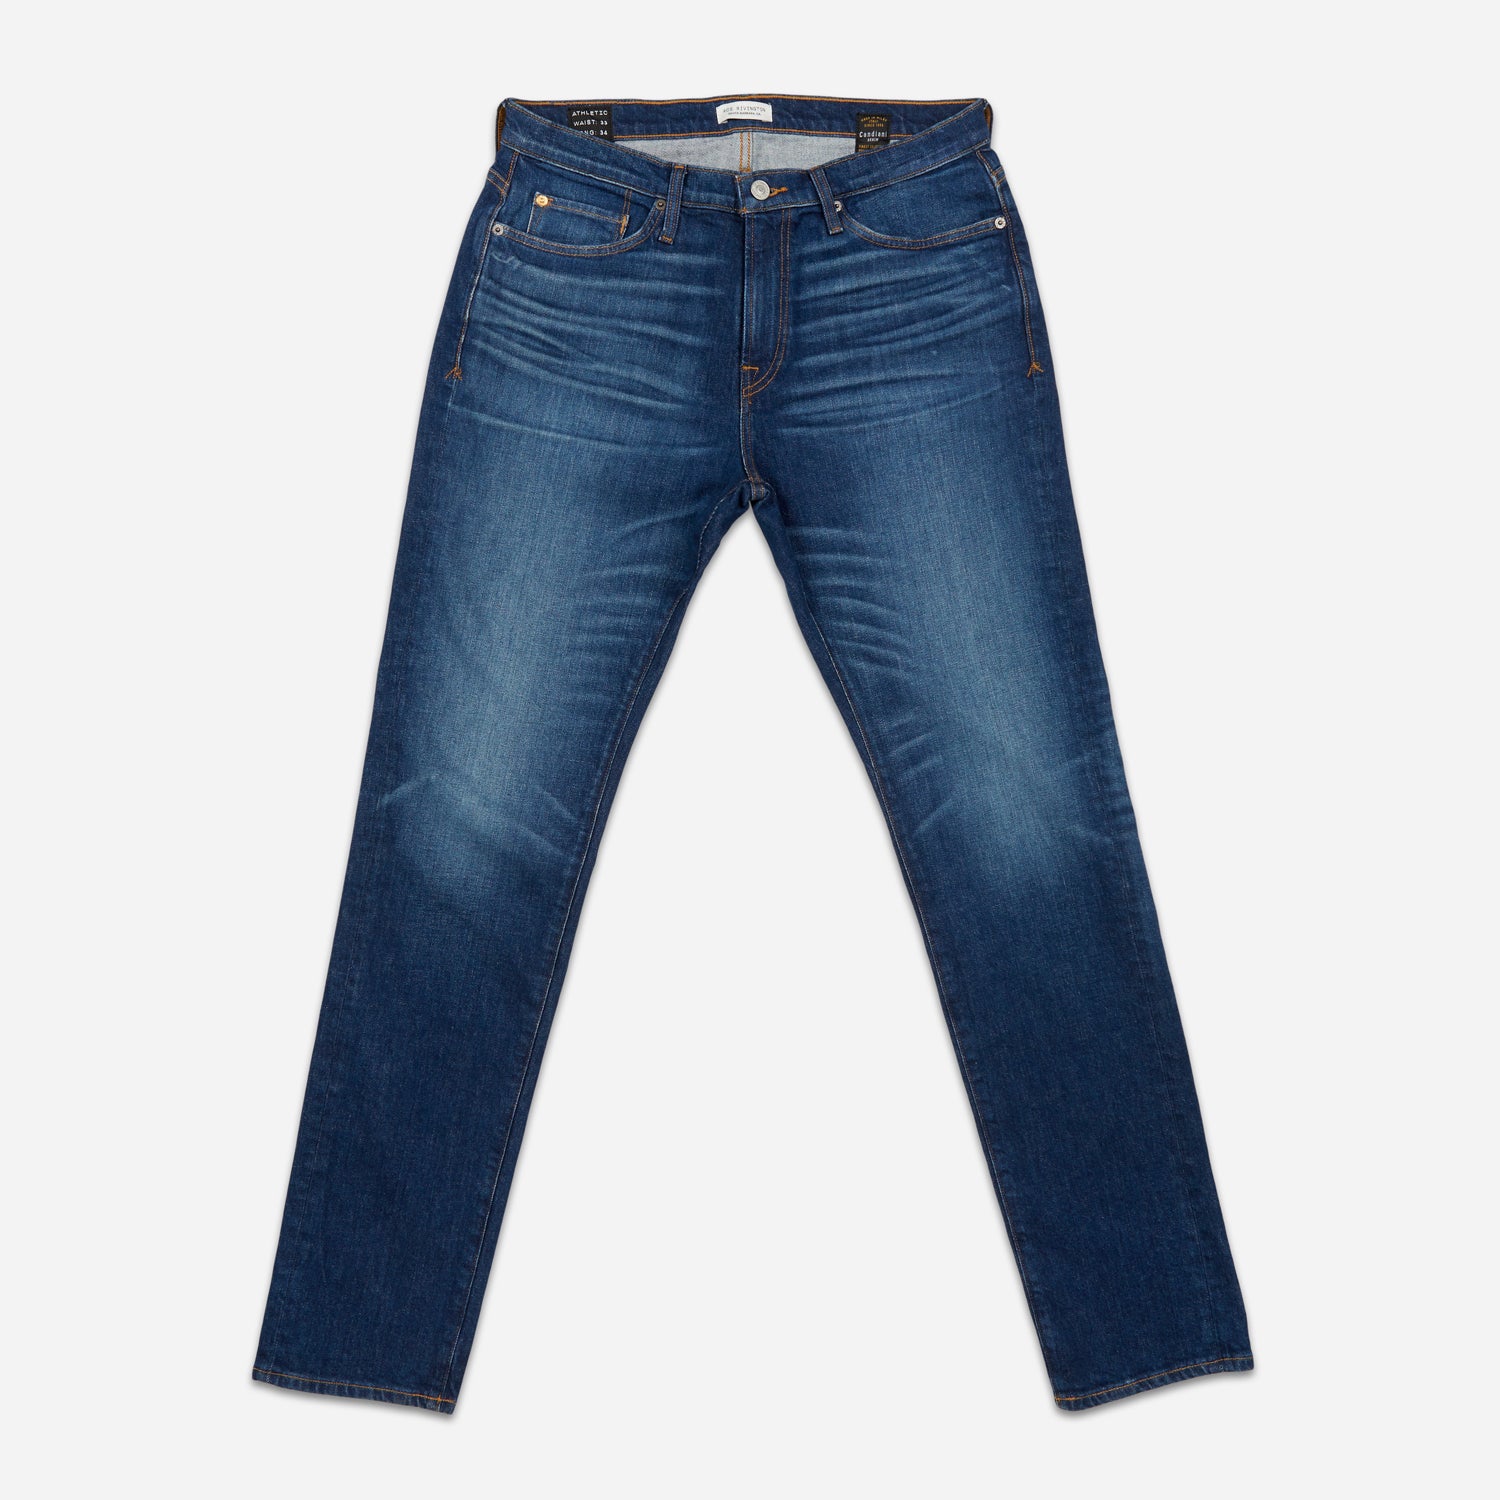 Are the men's jeans by American Eagle good quality? Is there a competitive  brand that people would recommend with similar comfort/quality? - Quora